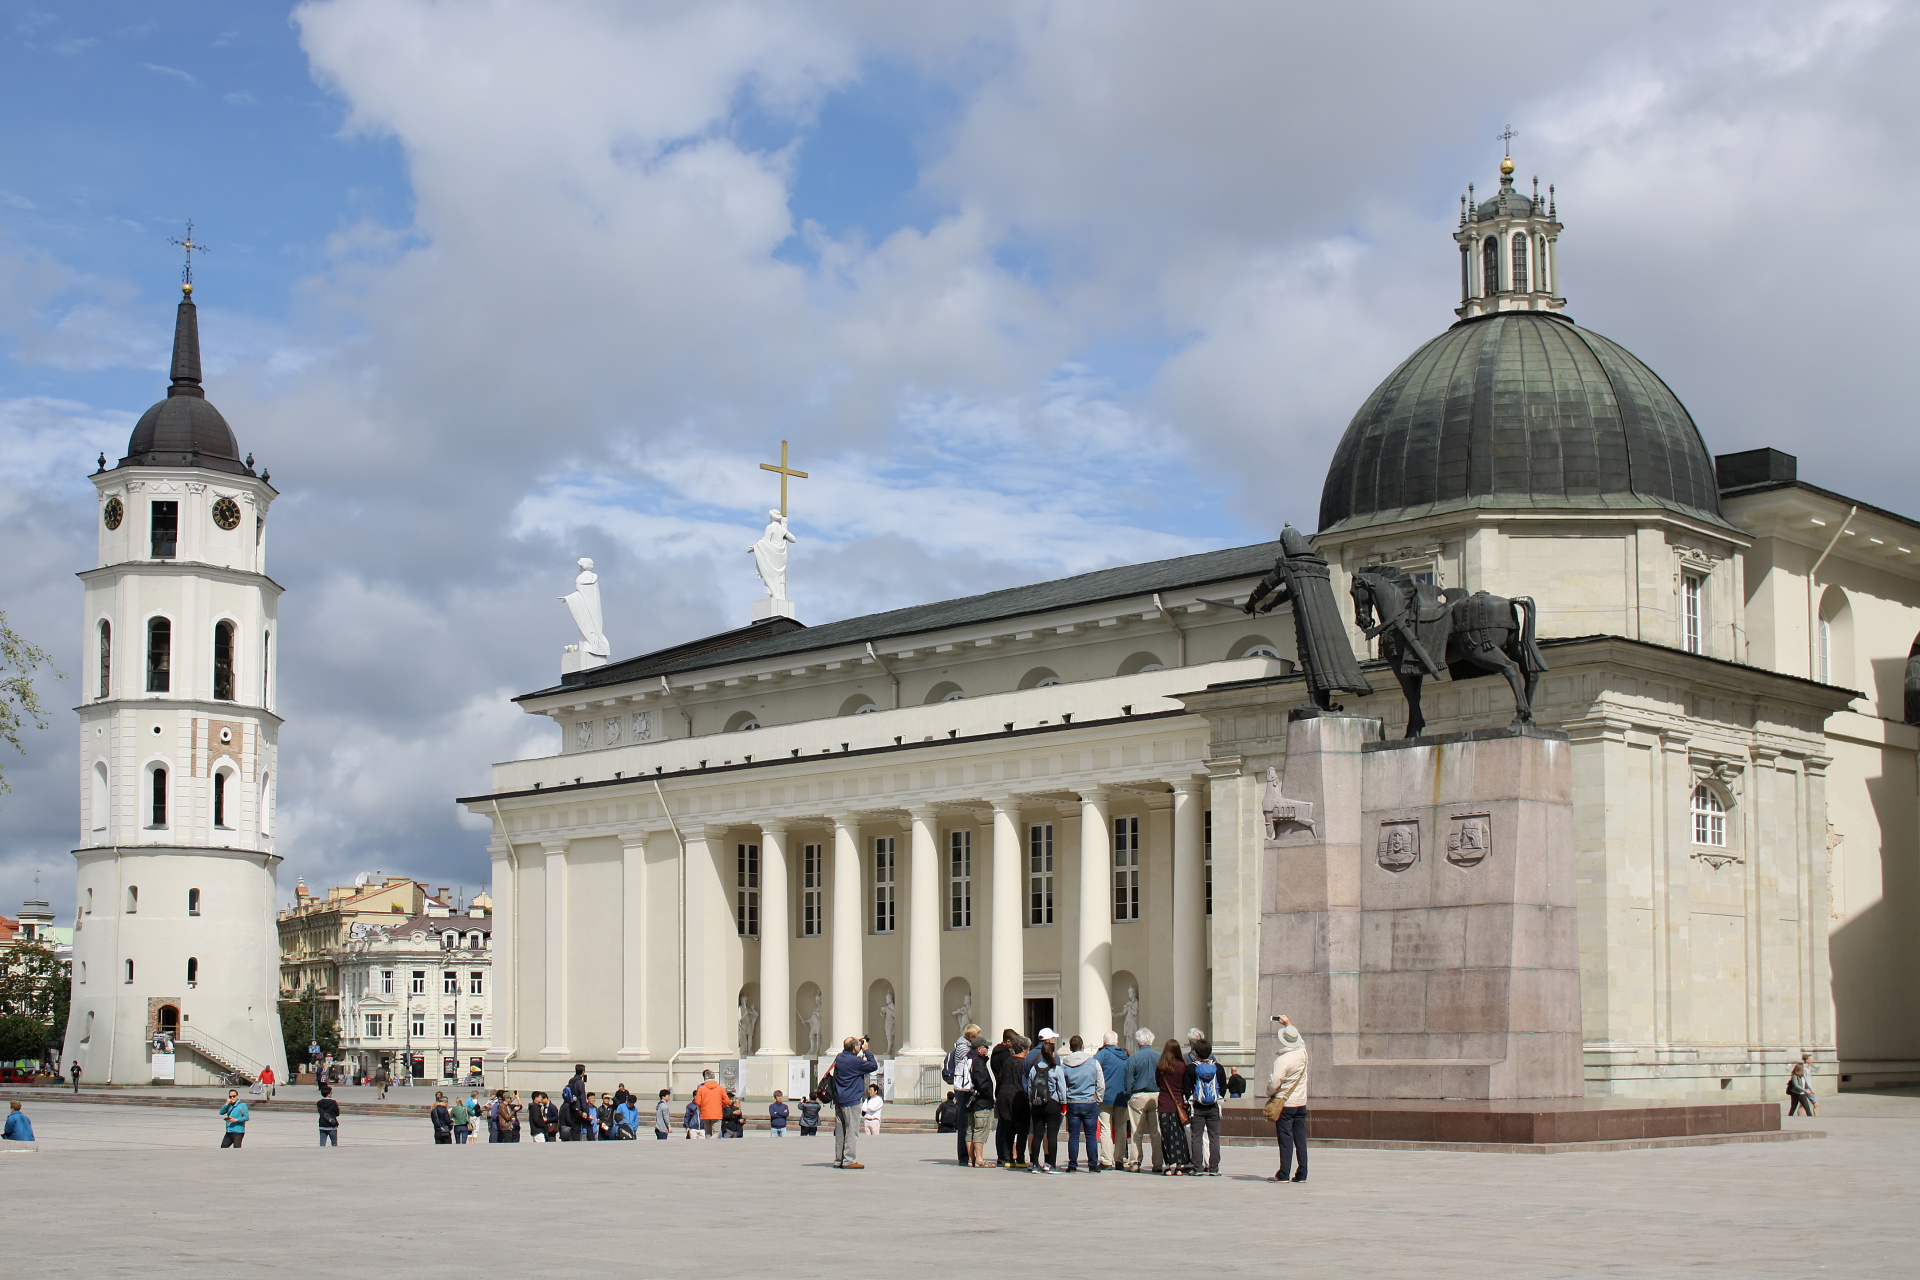 Cathedral Square, Bell Tower and Cathedral Basilica of St Stanislaus and St Ladislaus of Vilnius (Travels » Vilnius)